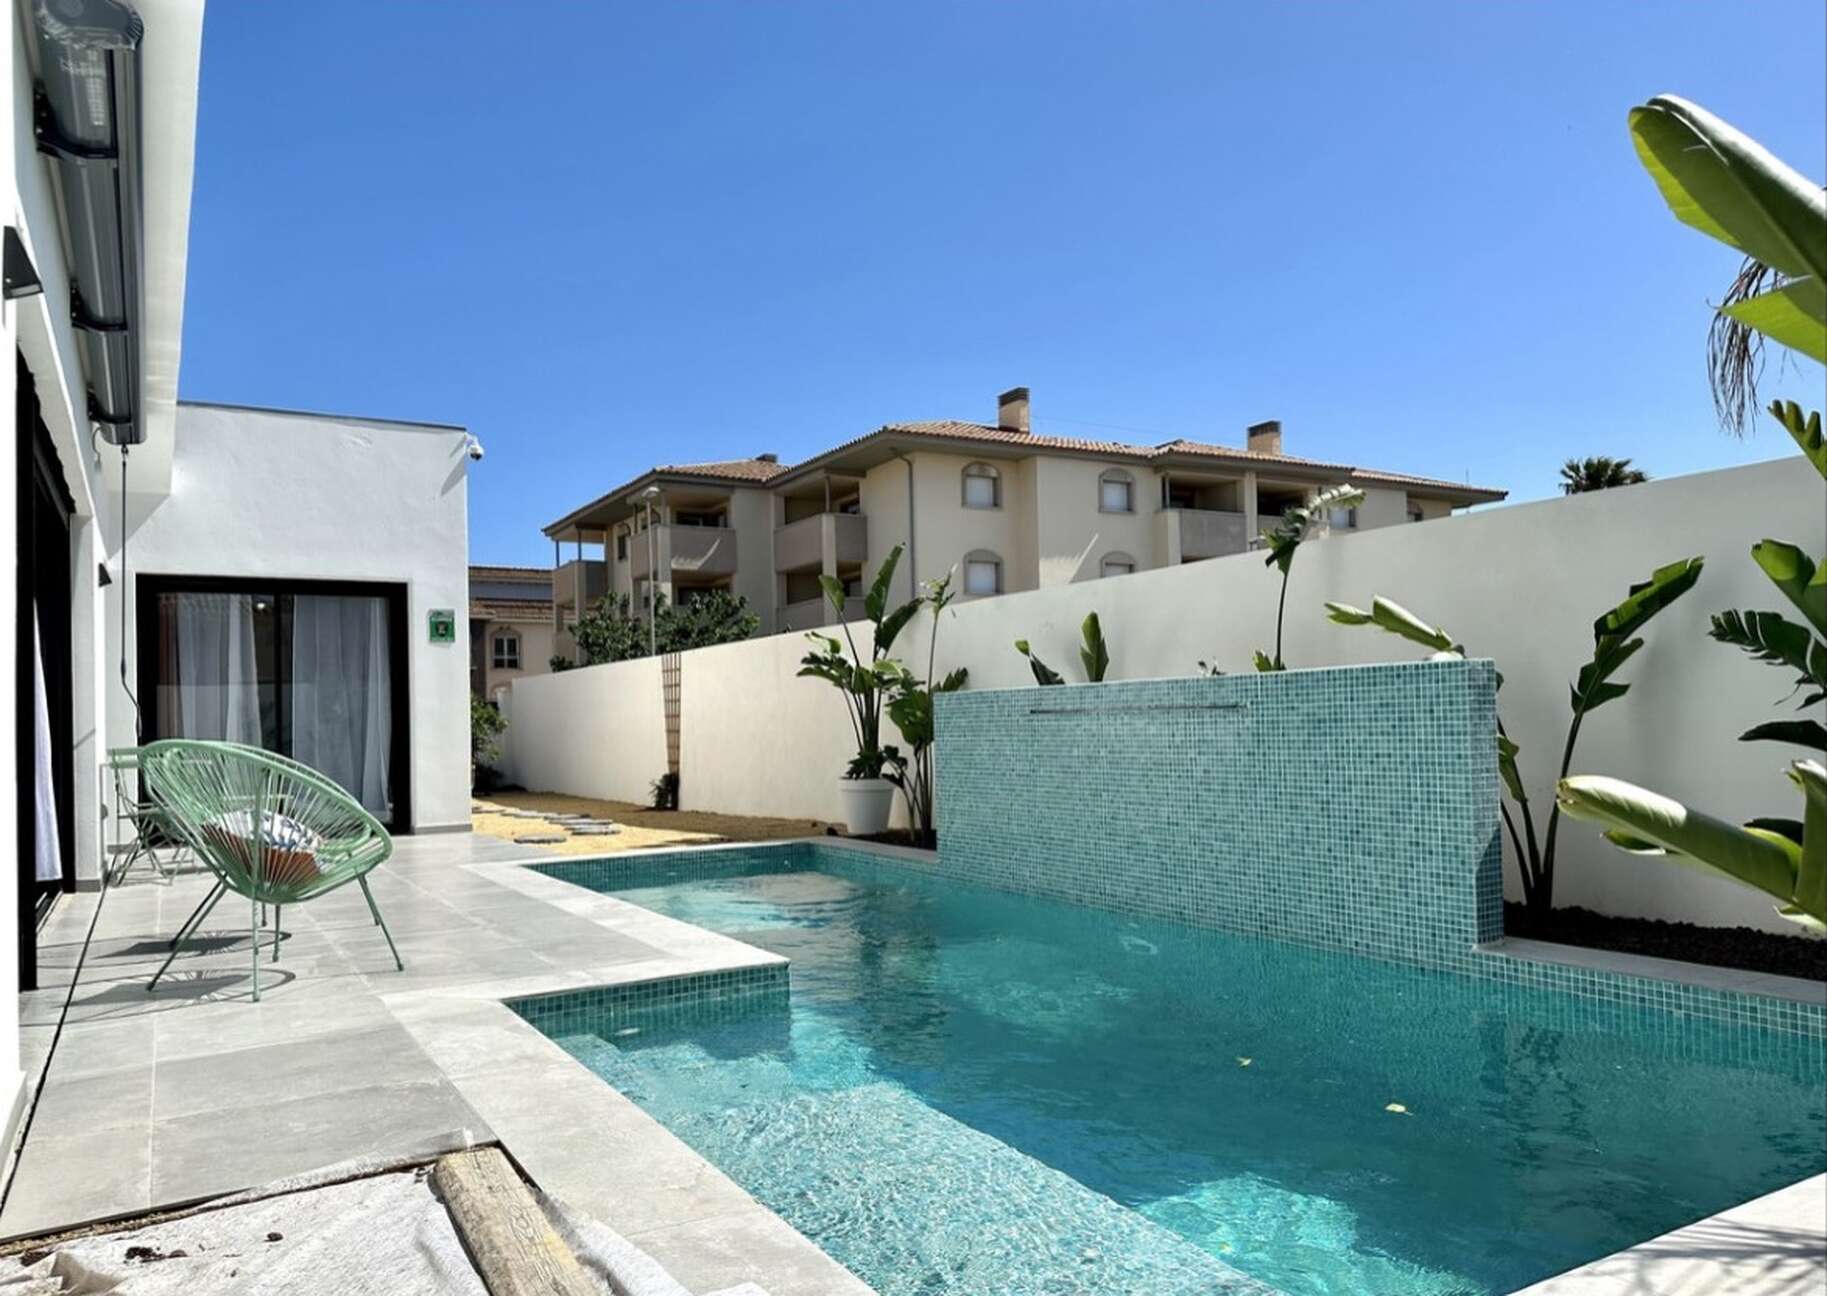 Spectacular new modern style house for sale in Empuriabrava